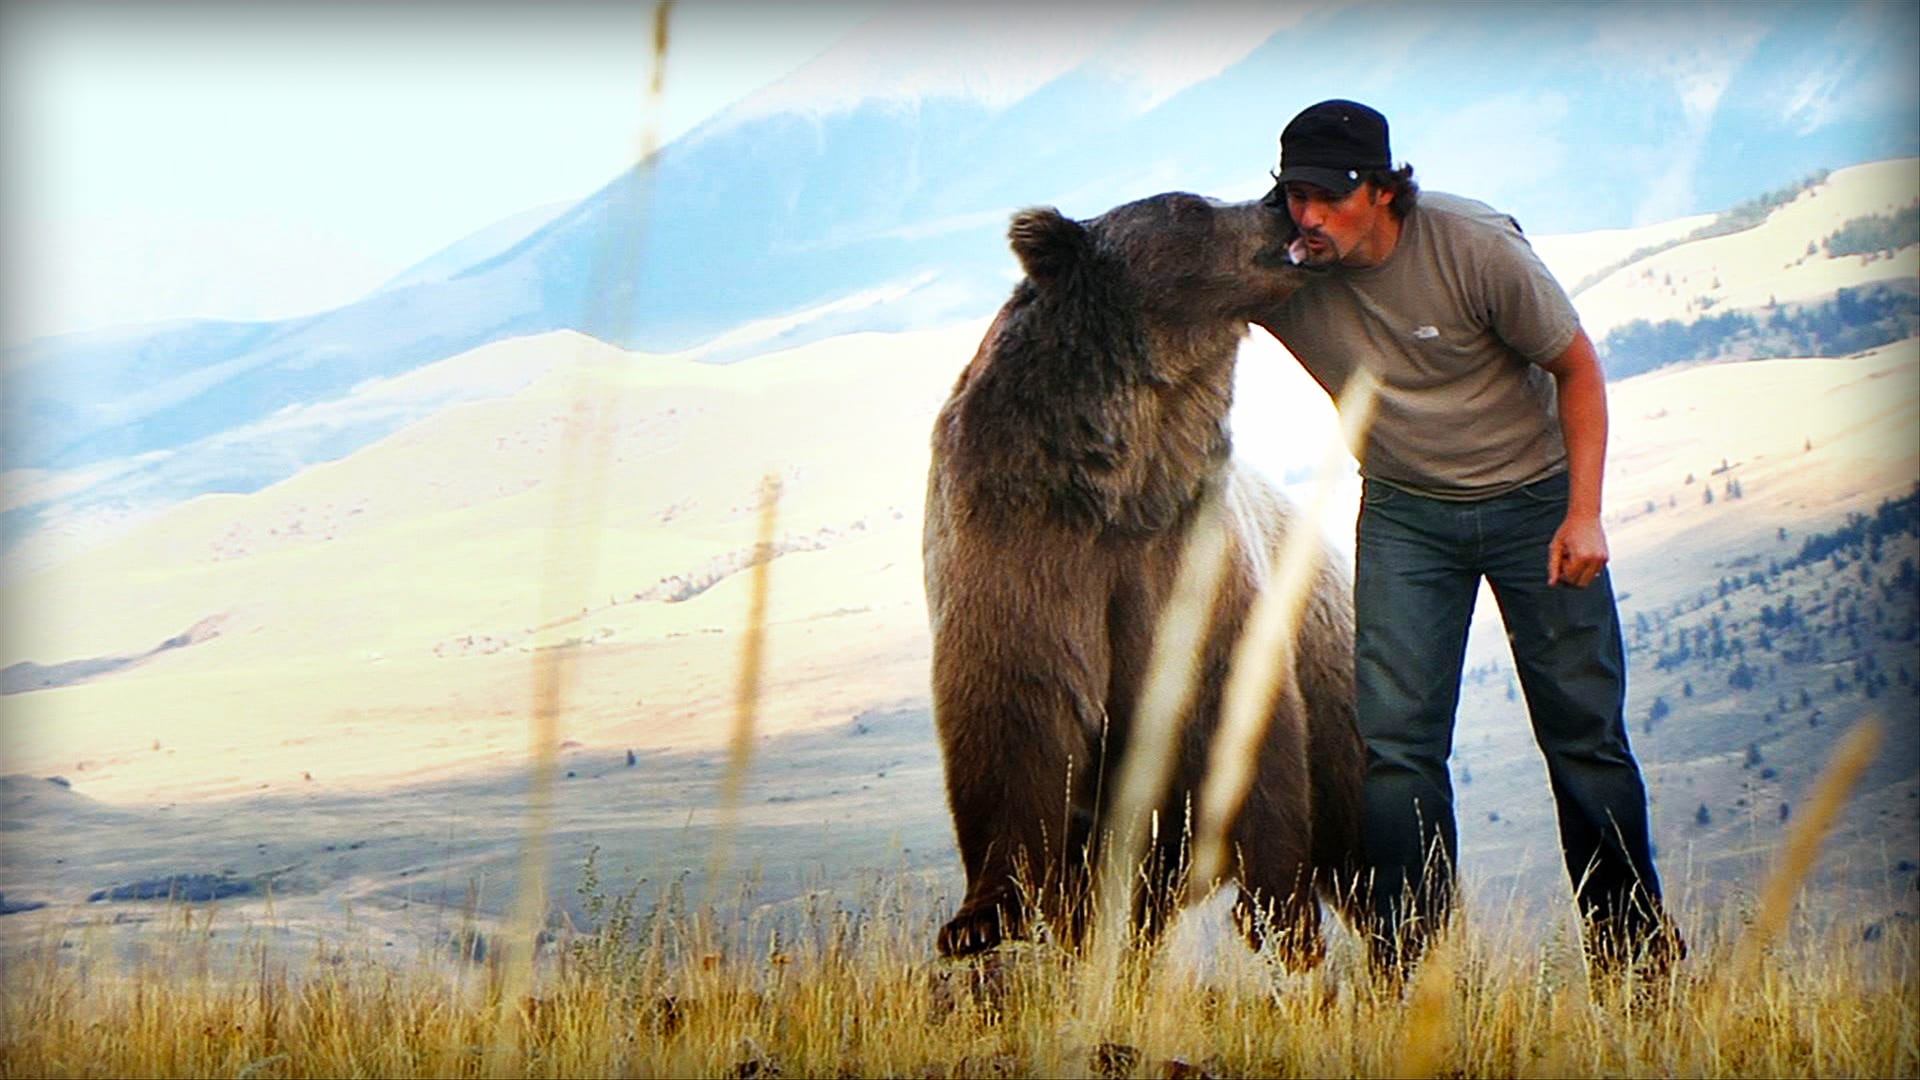 When A Man Saved An Abandoned Bear Cub, It Was The Beginning Of A